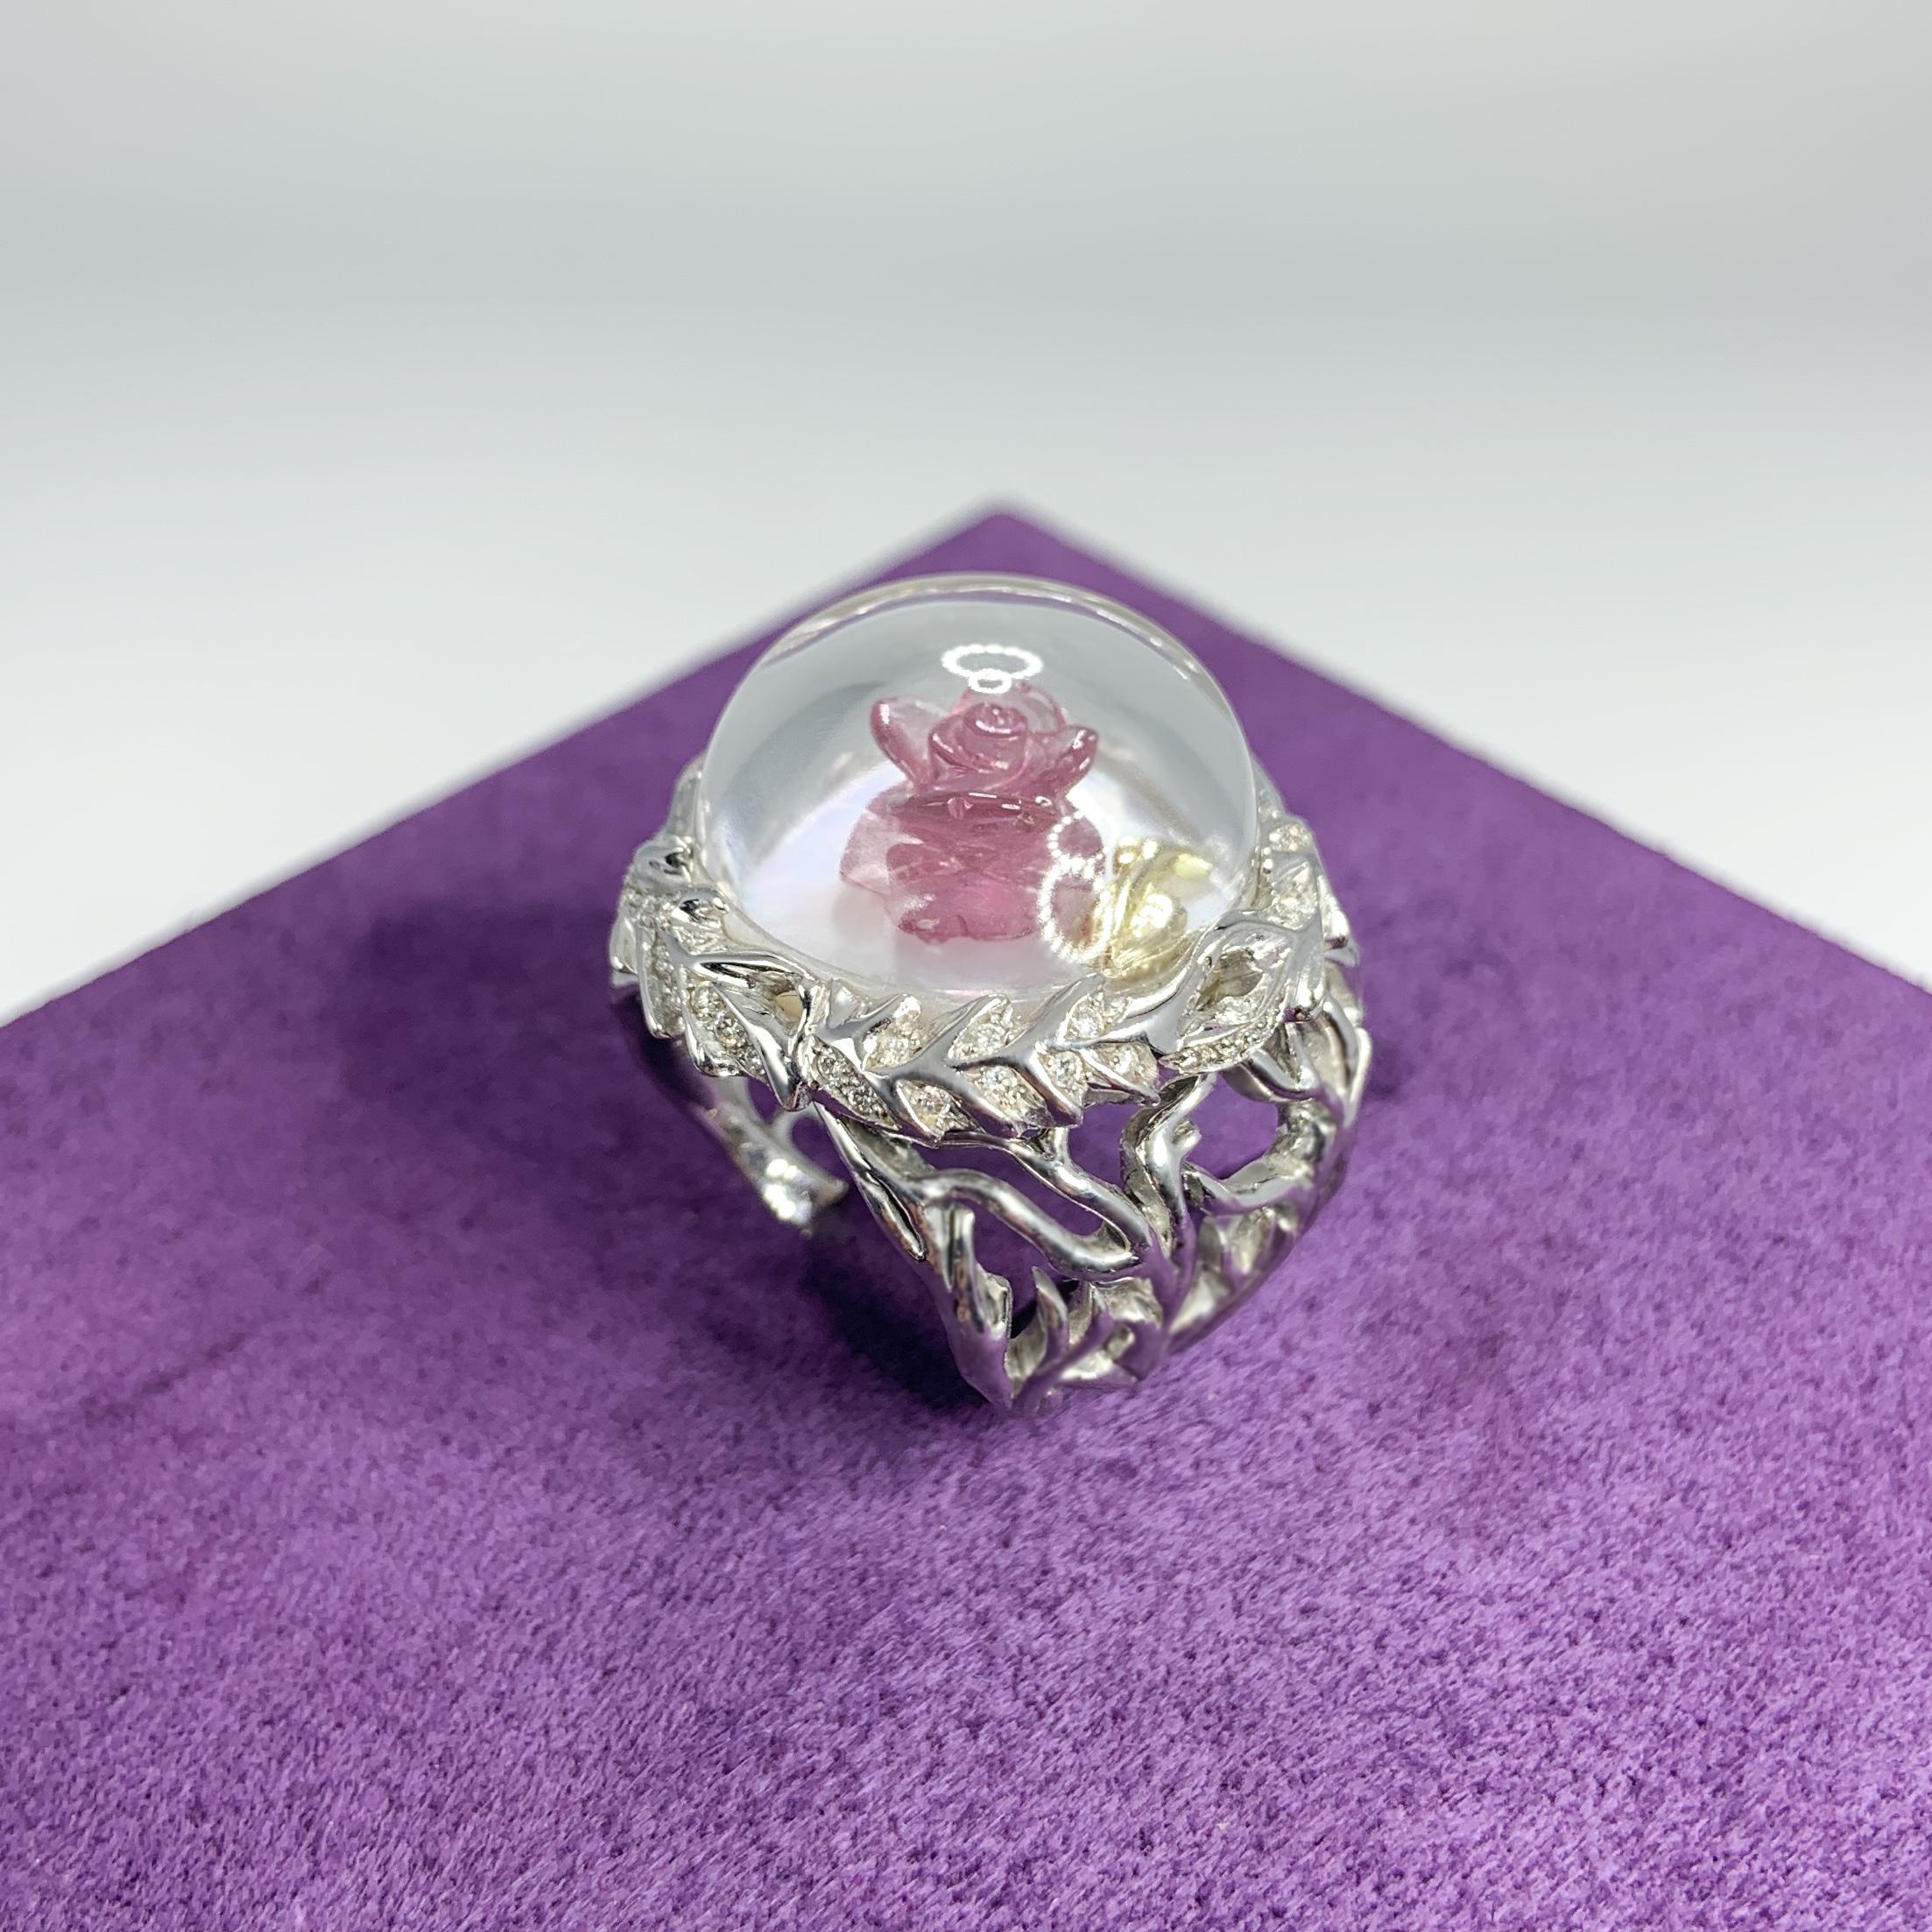 Women's Rubellite Rose in Rock Crystal Dome, Diamonds and 18K White Gold Ring by Édéenne For Sale